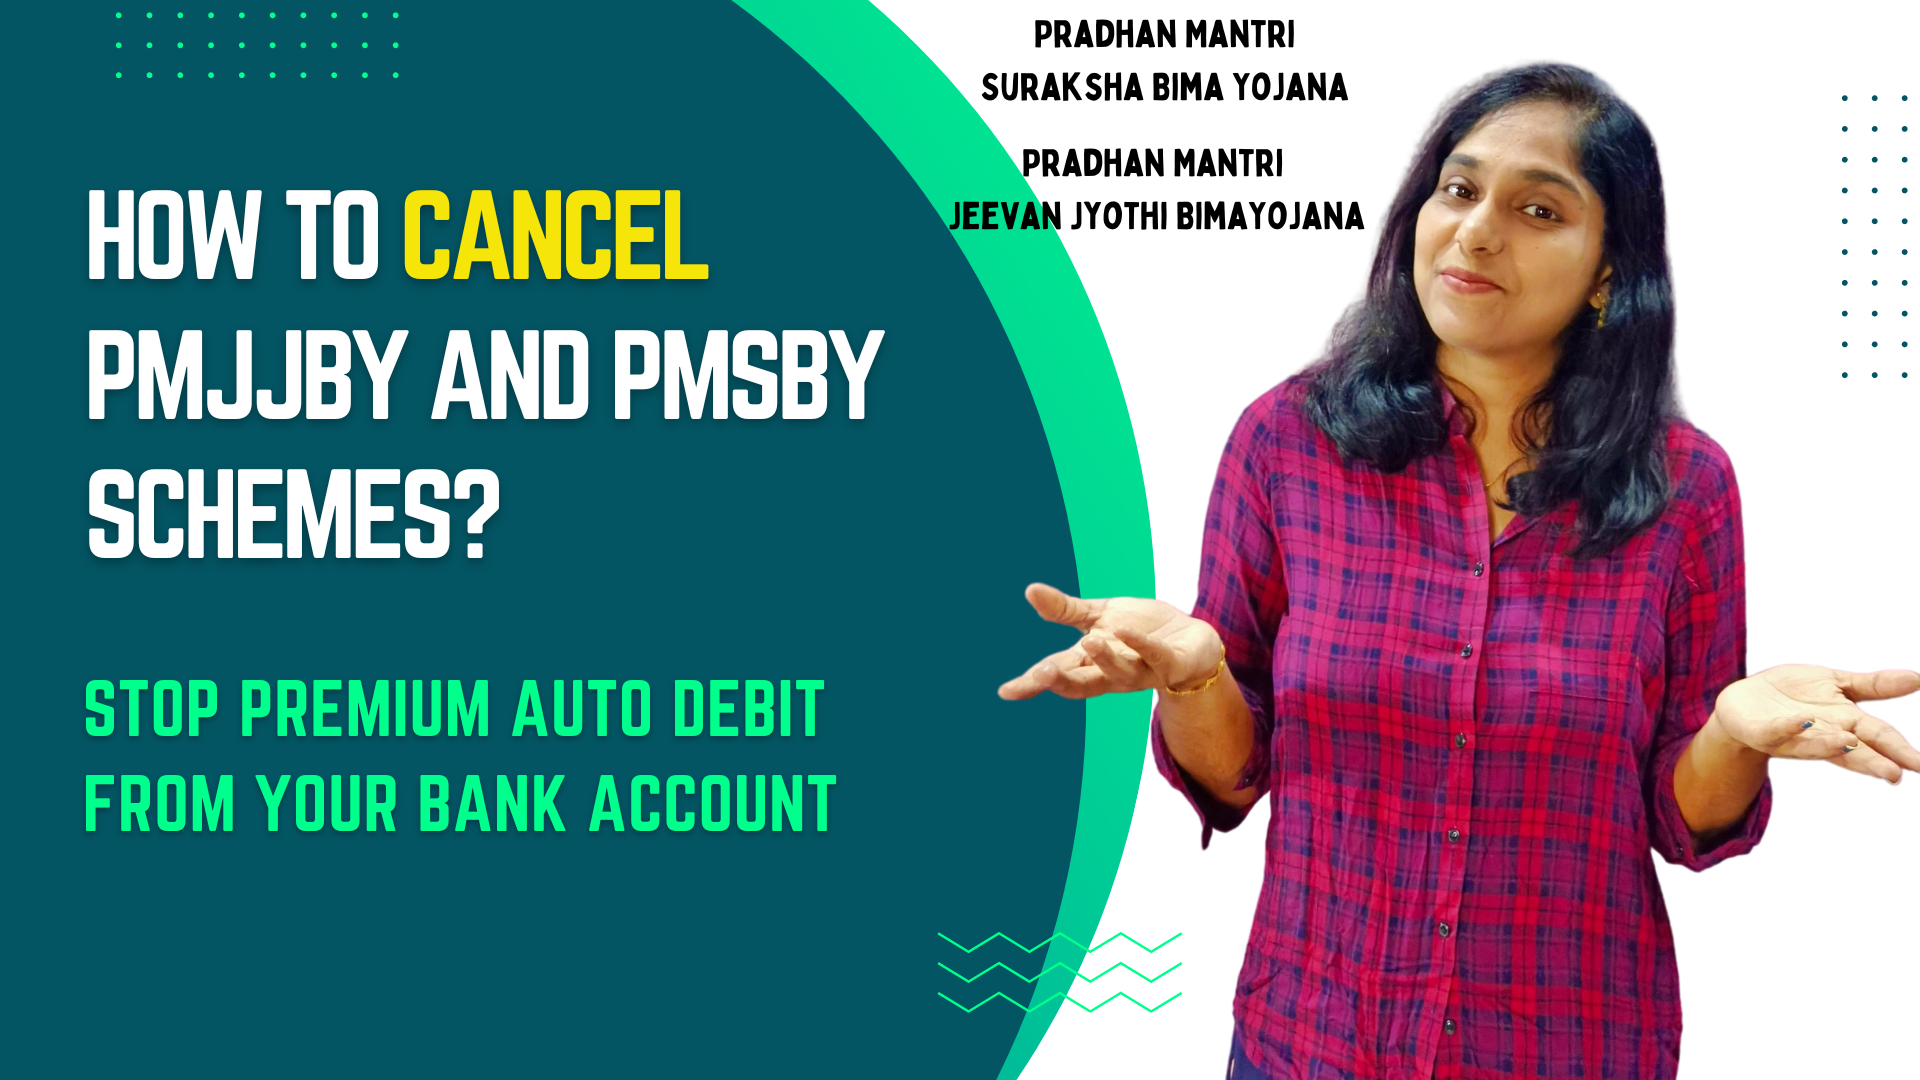 How To Cancel PMJJBY And PMSBY Schemes And Stop Premium Auto Debit From Your Bank Account?